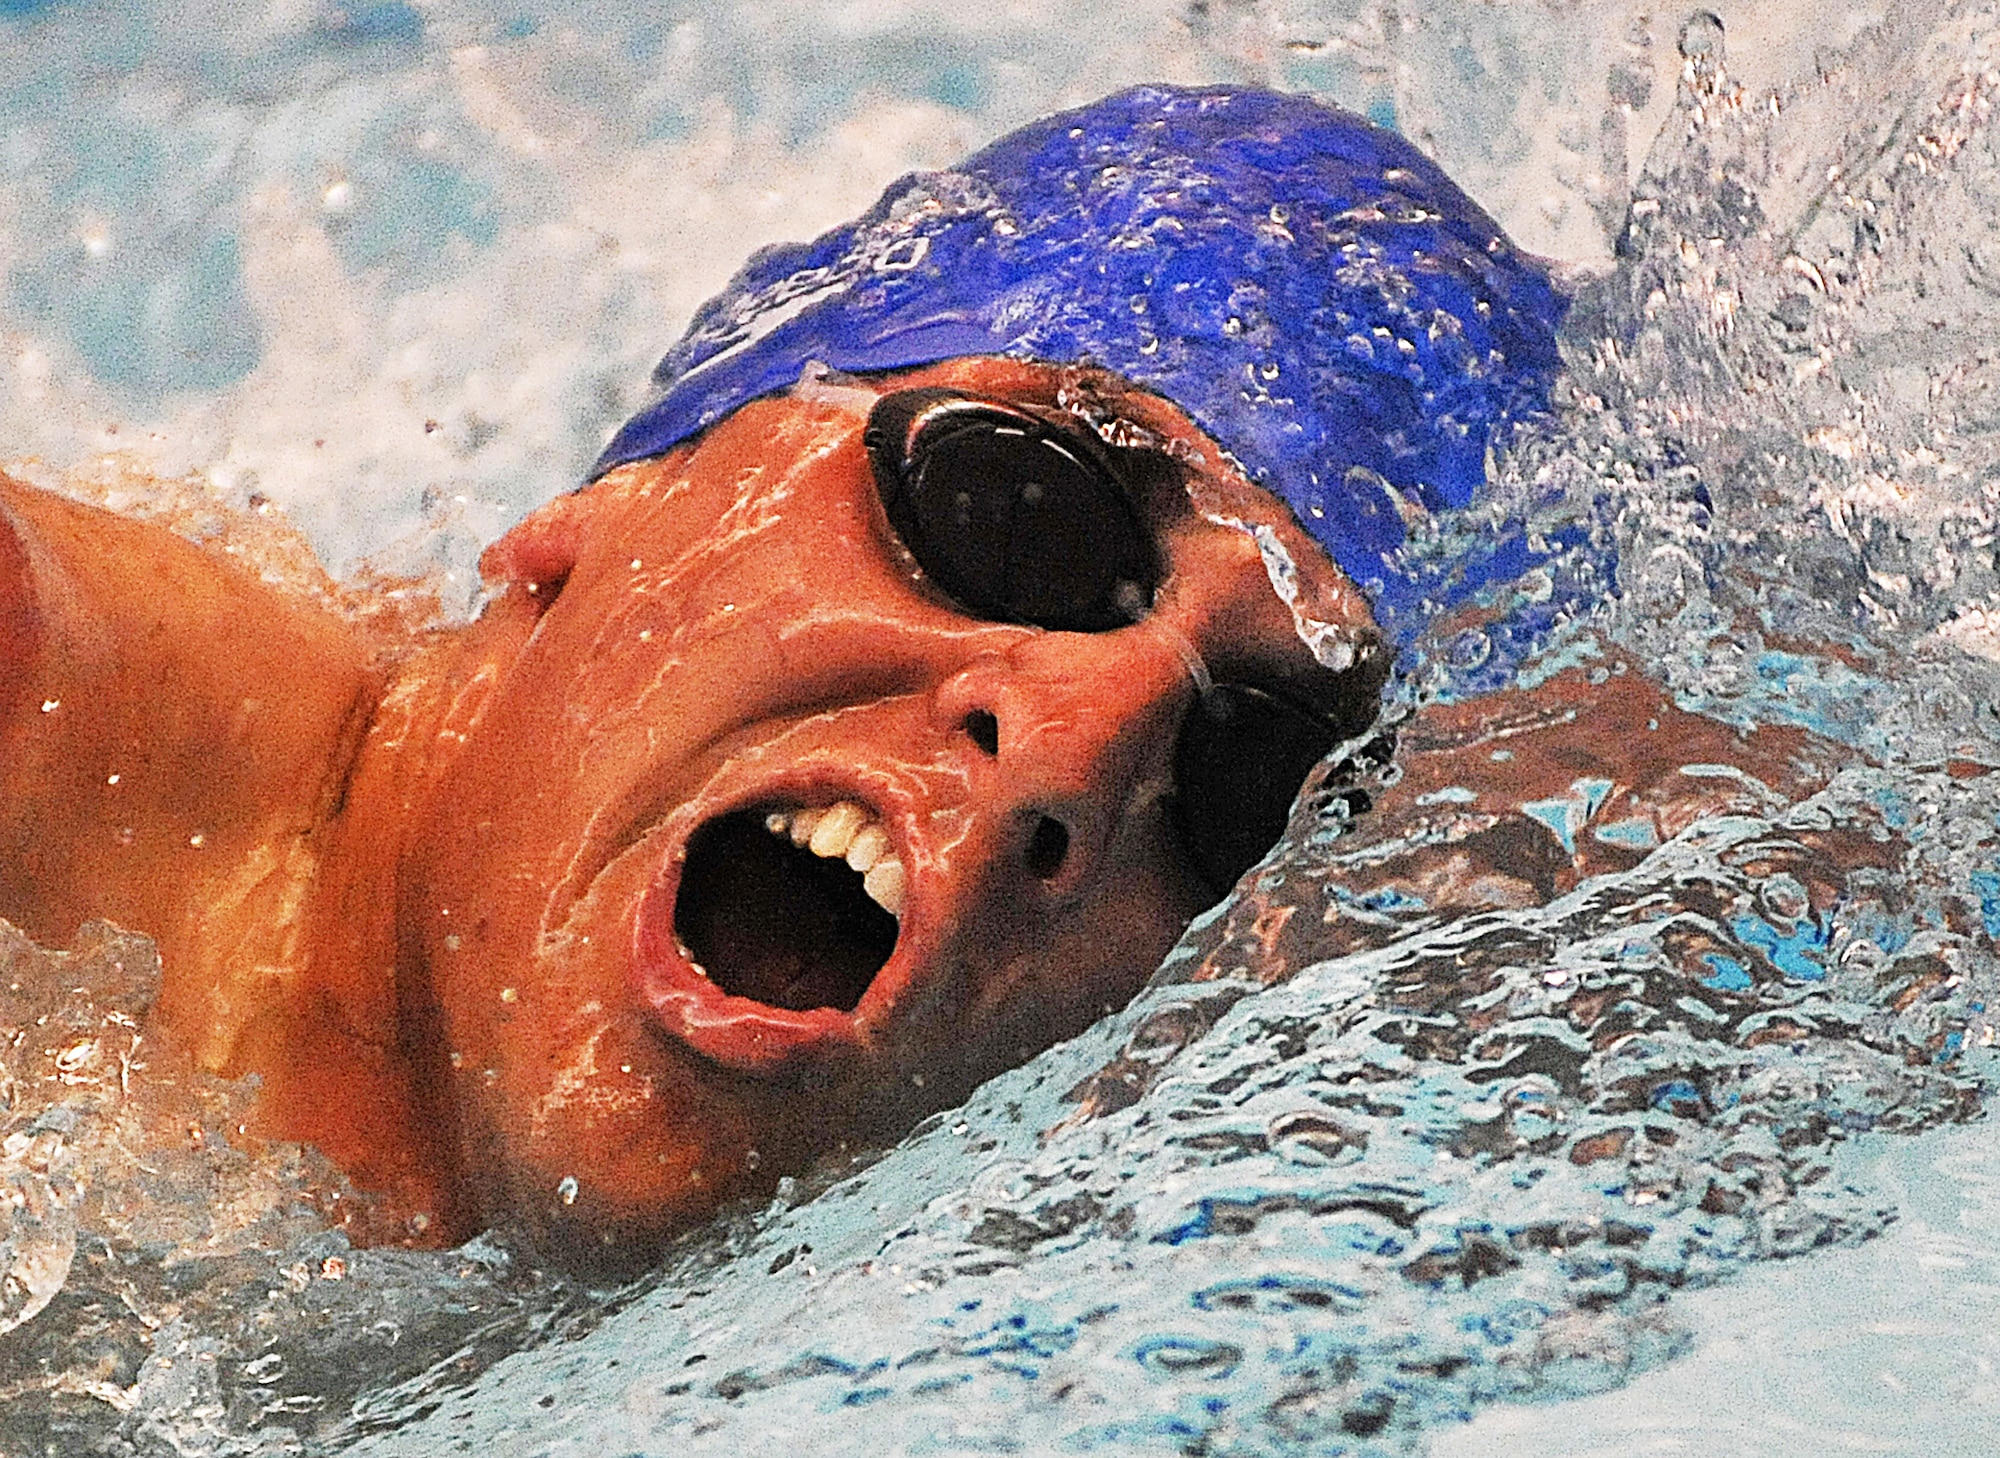 U.S. Air Force 1st Lt. Ryan McGuire heads toward the finish line as he takes part in a swimming competition during Warrior Games 2012 at the U.S. Air Force Academy in Colorado Springs, Colo., May 5, 2012. McGuire is with the Air Force team. (U.S. Air Force photo by Val Gempis/Released)